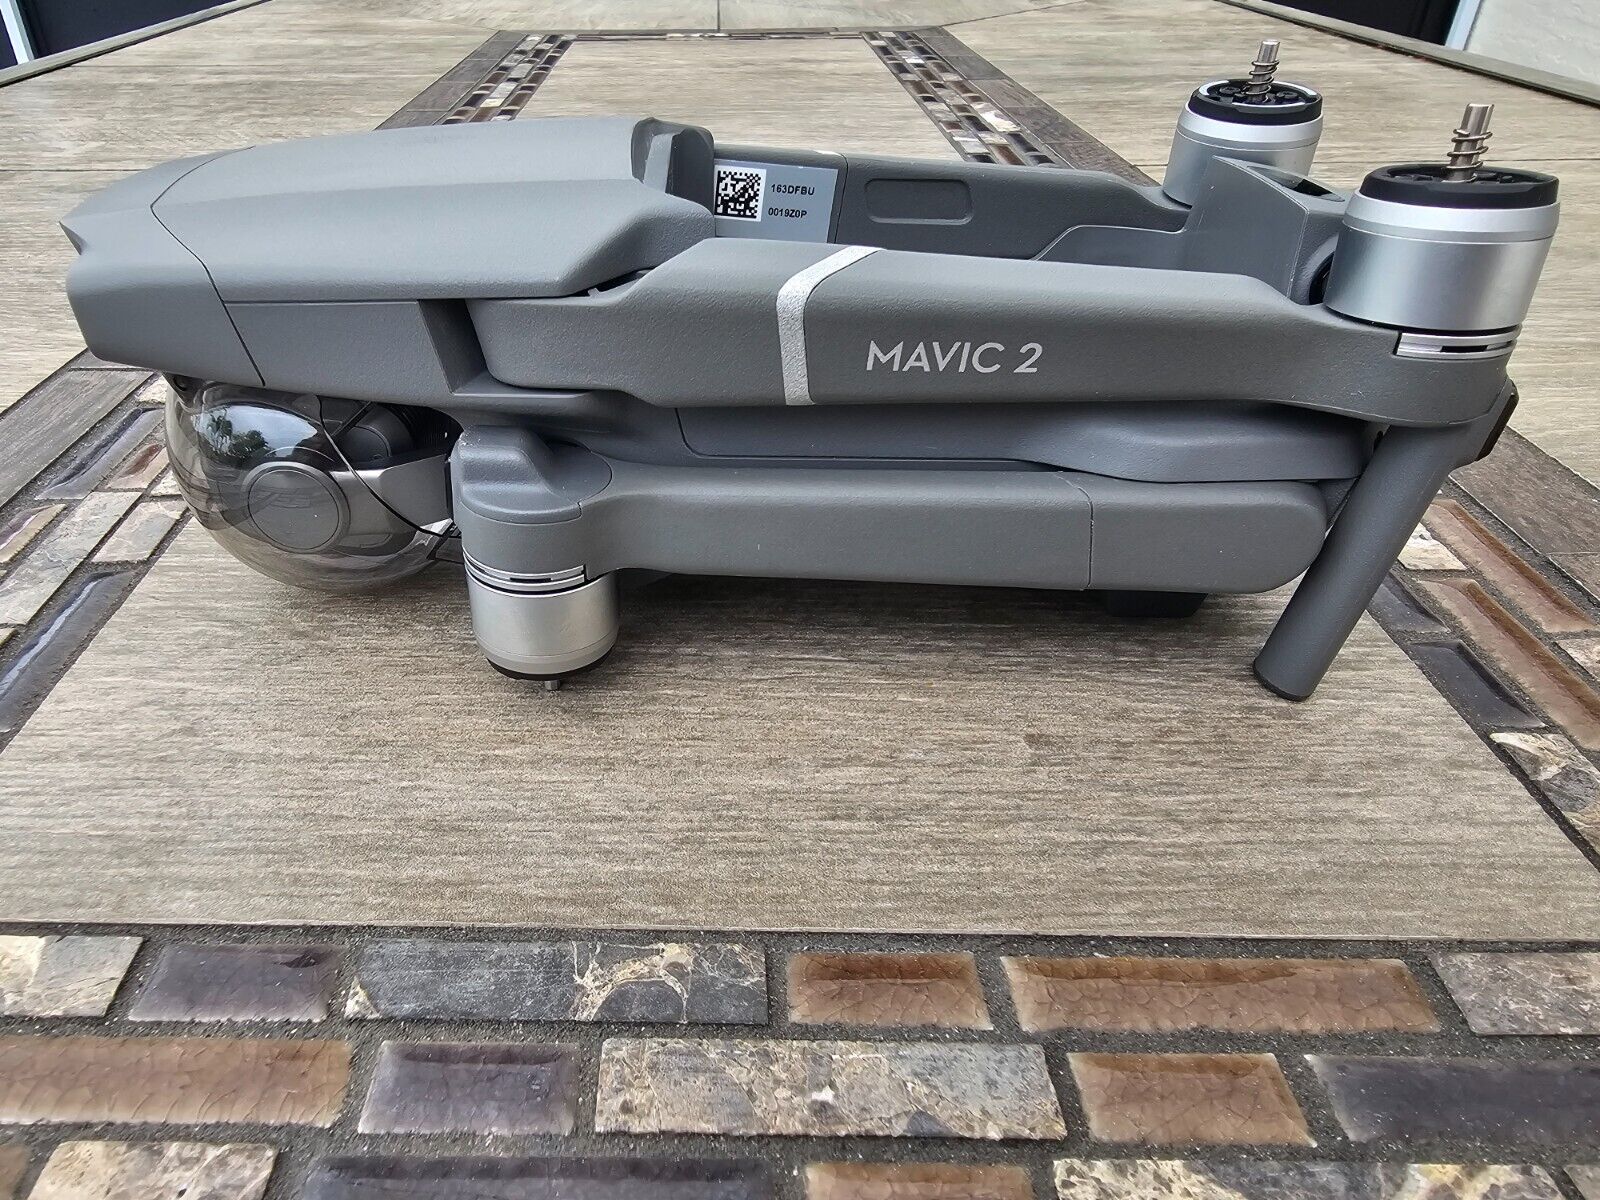 DJI Mavic 2 Pro Drone (Aircraft Body Only) Replacement For Crash / Lost